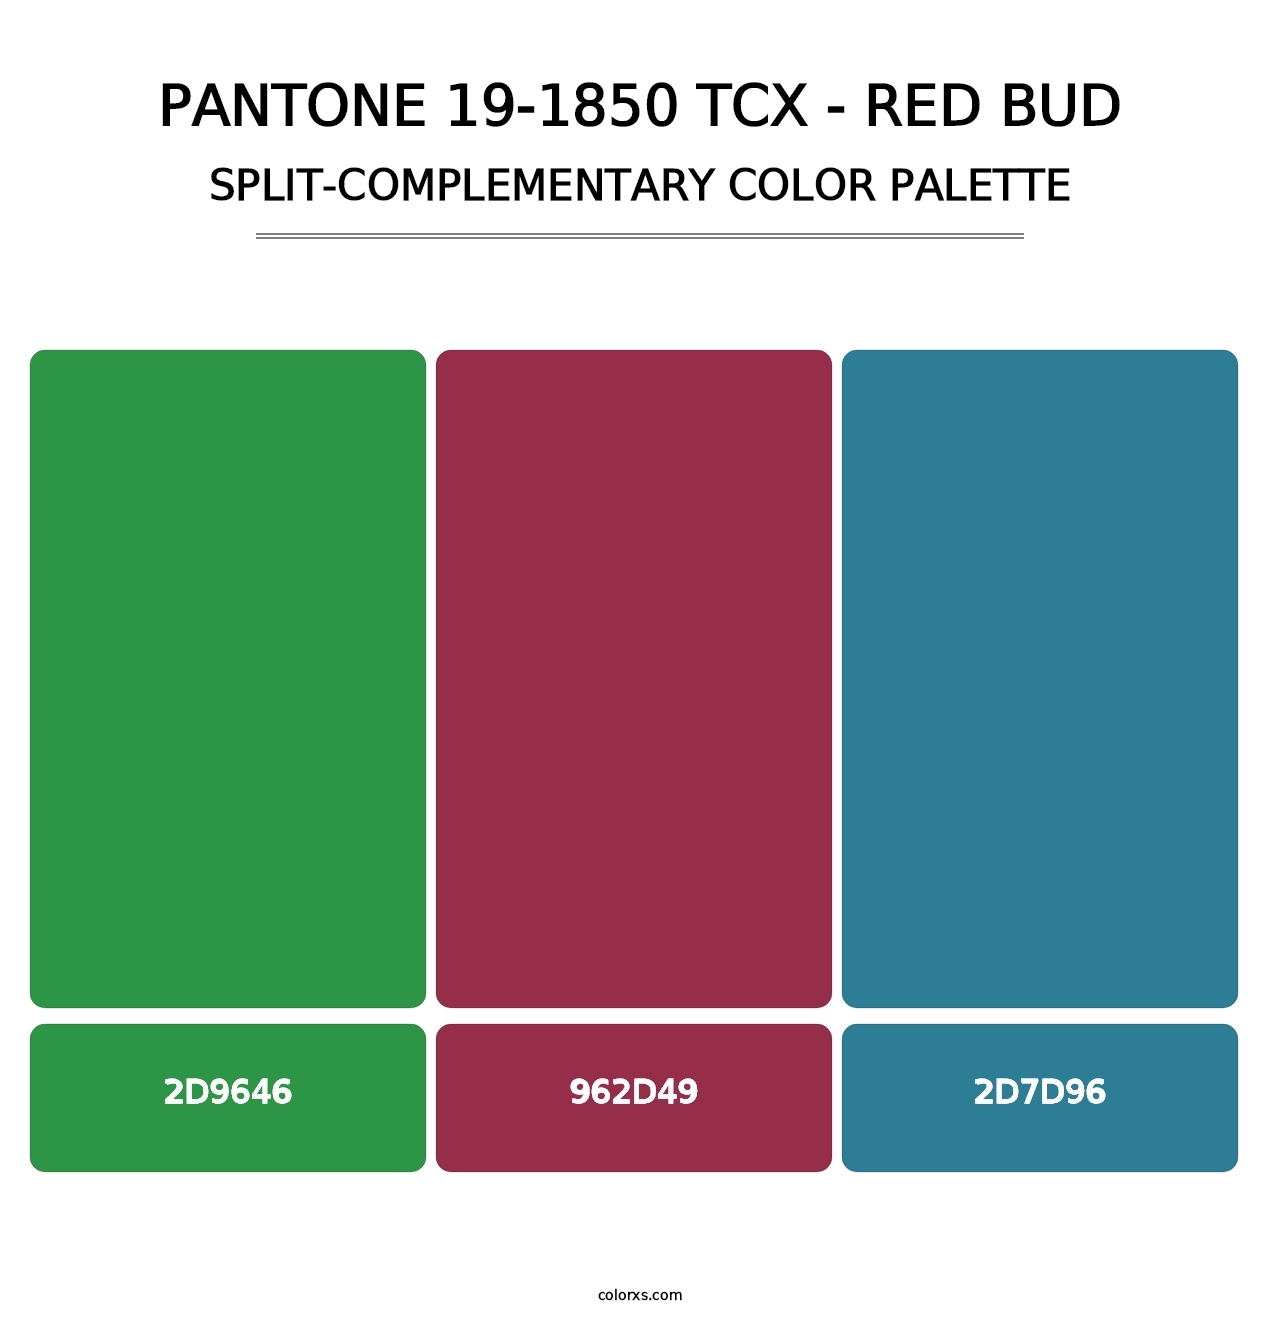 PANTONE 19-1850 TCX - Red Bud - Split-Complementary Color Palette